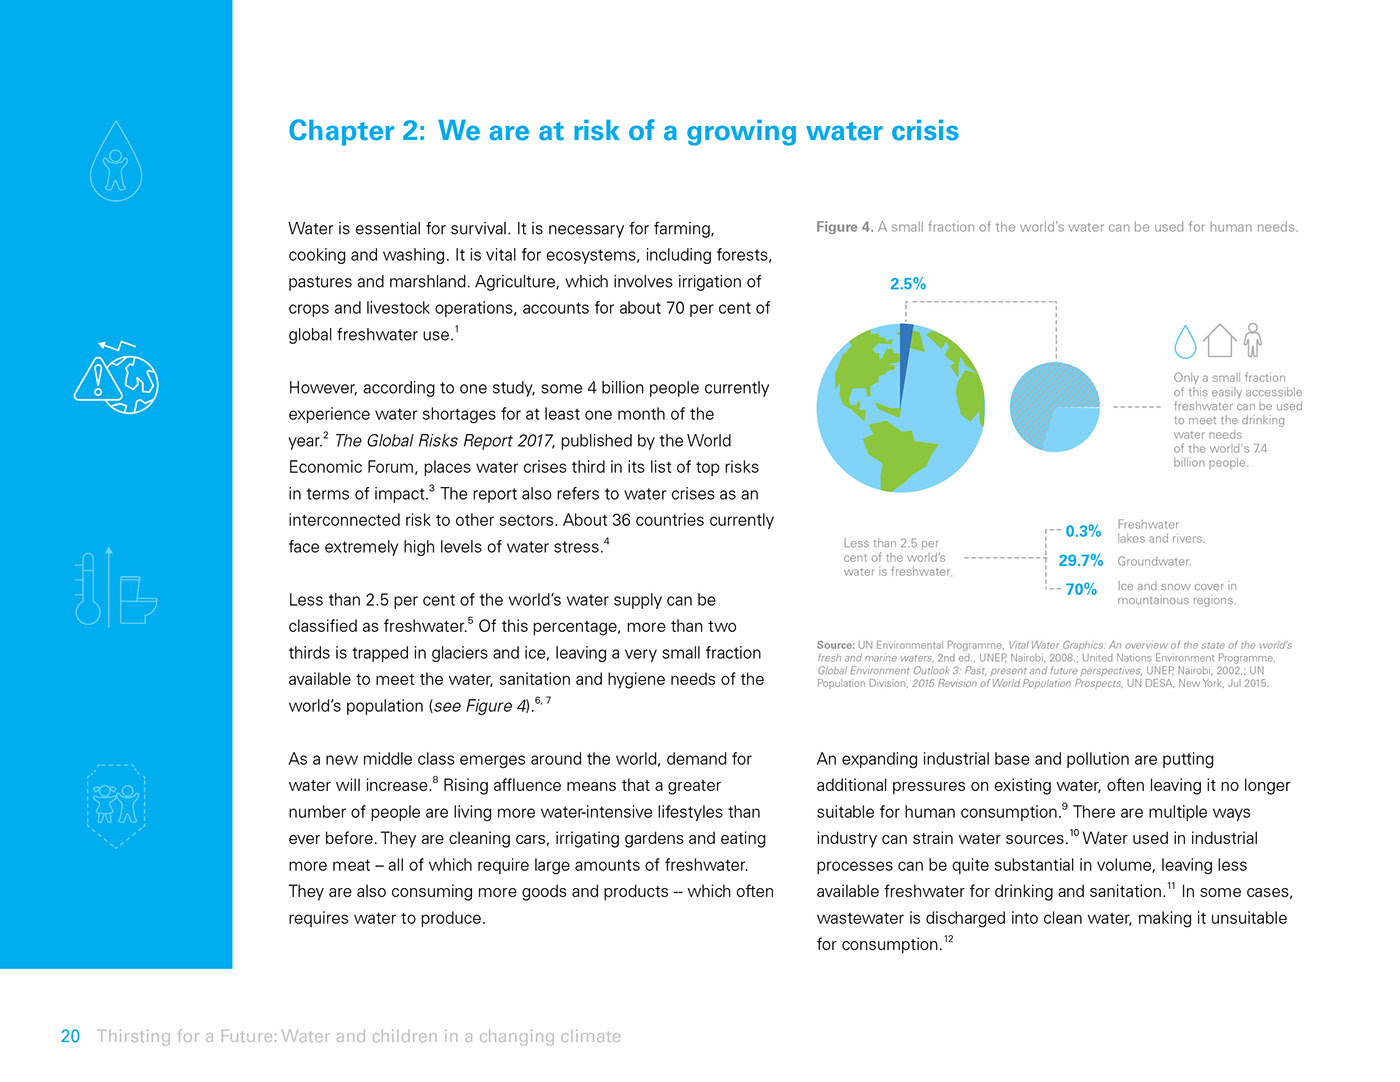 unicef climate change water wash water pollution Water crisis environment report United Nations agca